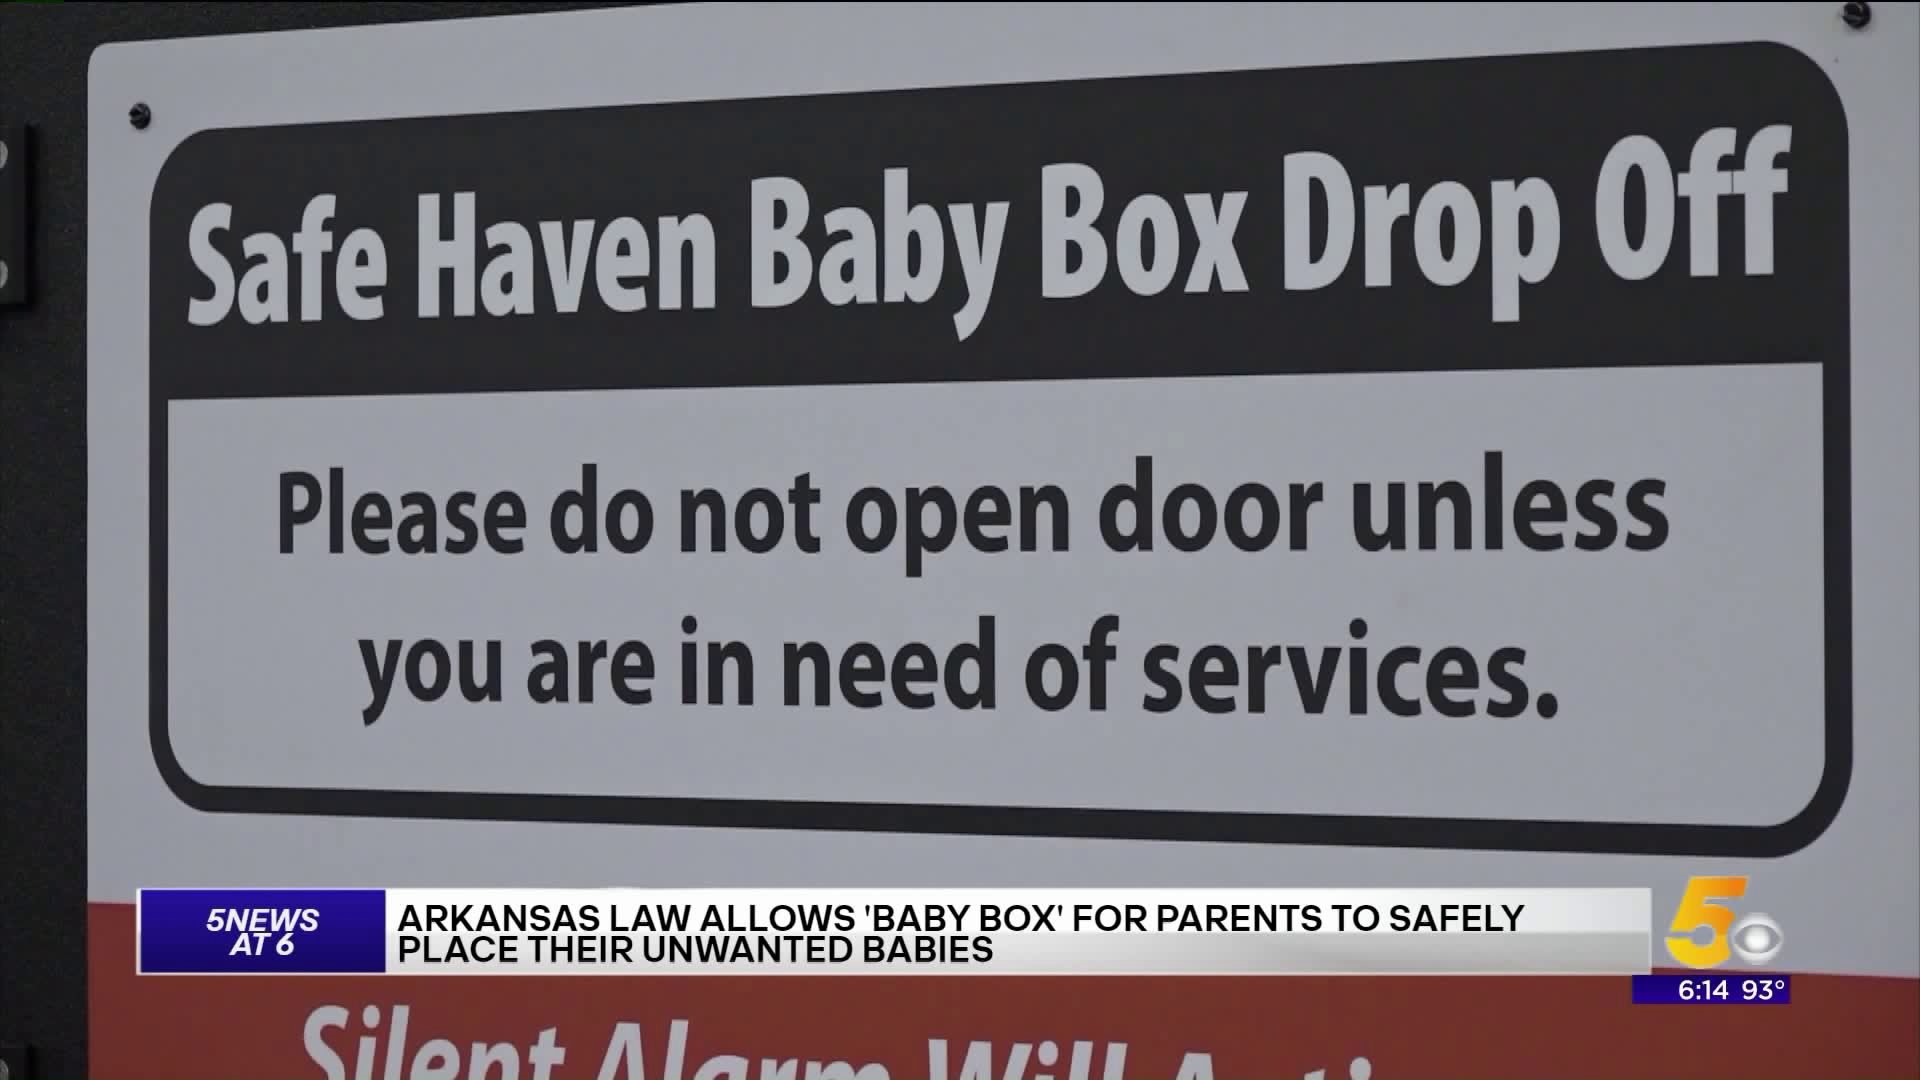 Arkansas Law Allows Save Haven Baby Box Drop Off